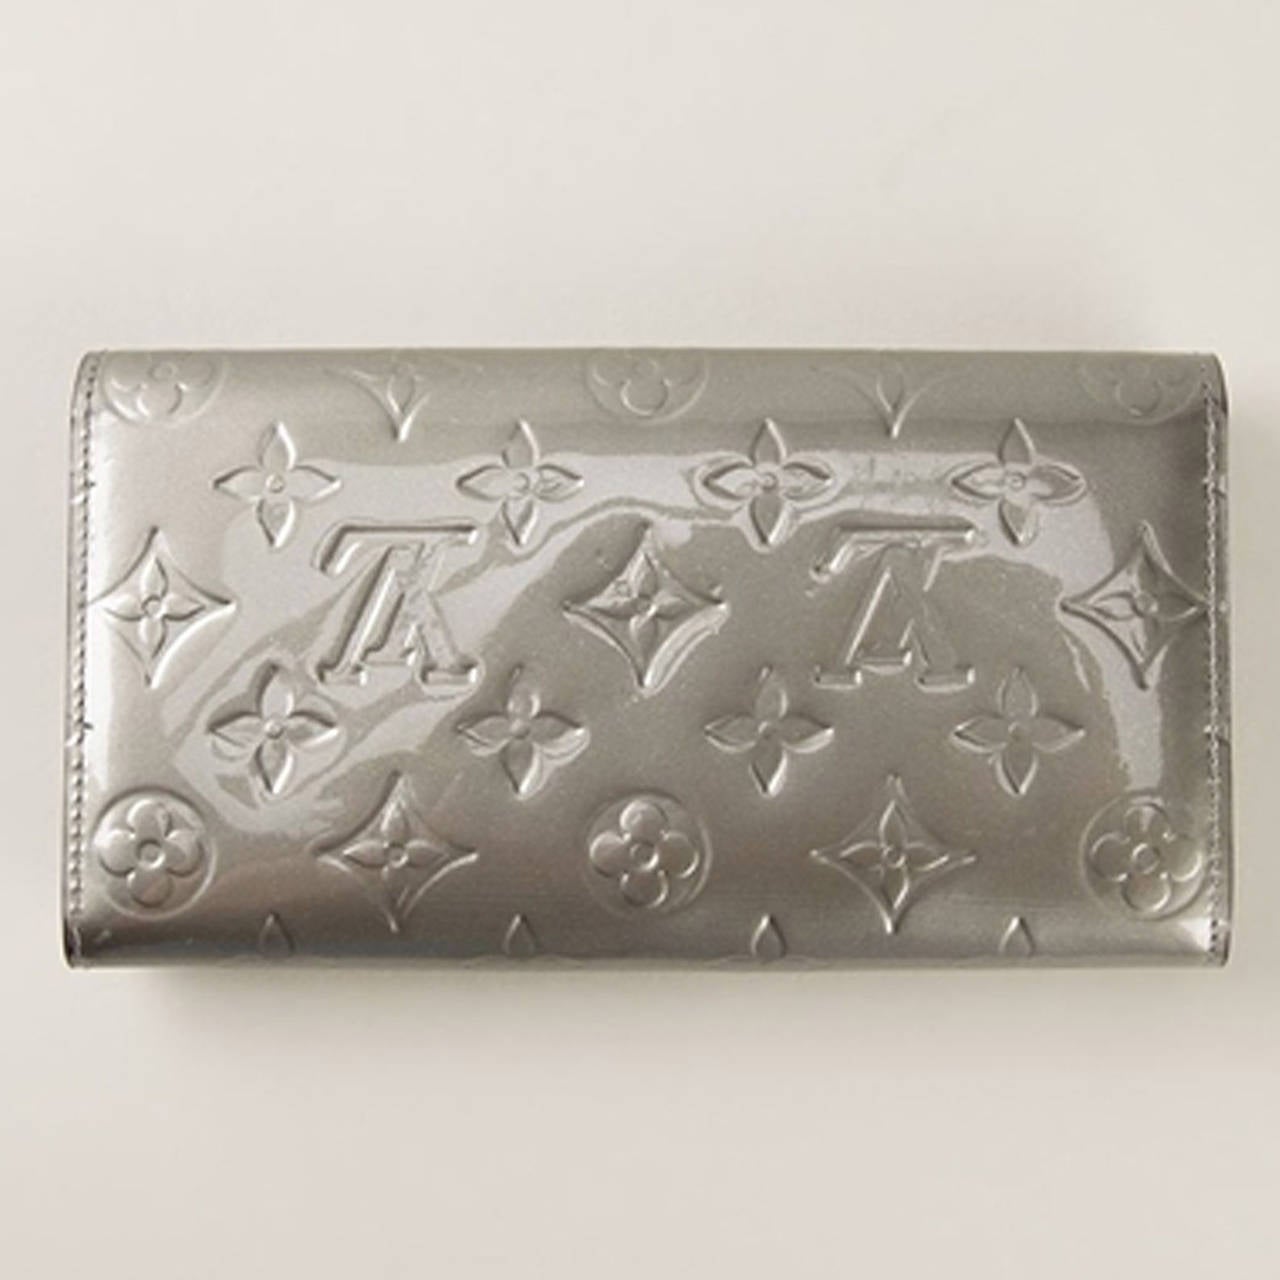 This Silver-tone leather 'Vernis Sarah' wallet from Louis Vuitton features foldover top with snap closure, a varnished finish, an interior zipped compartment, multiple interior card slots, an internal logo stamp and an embossed monogram